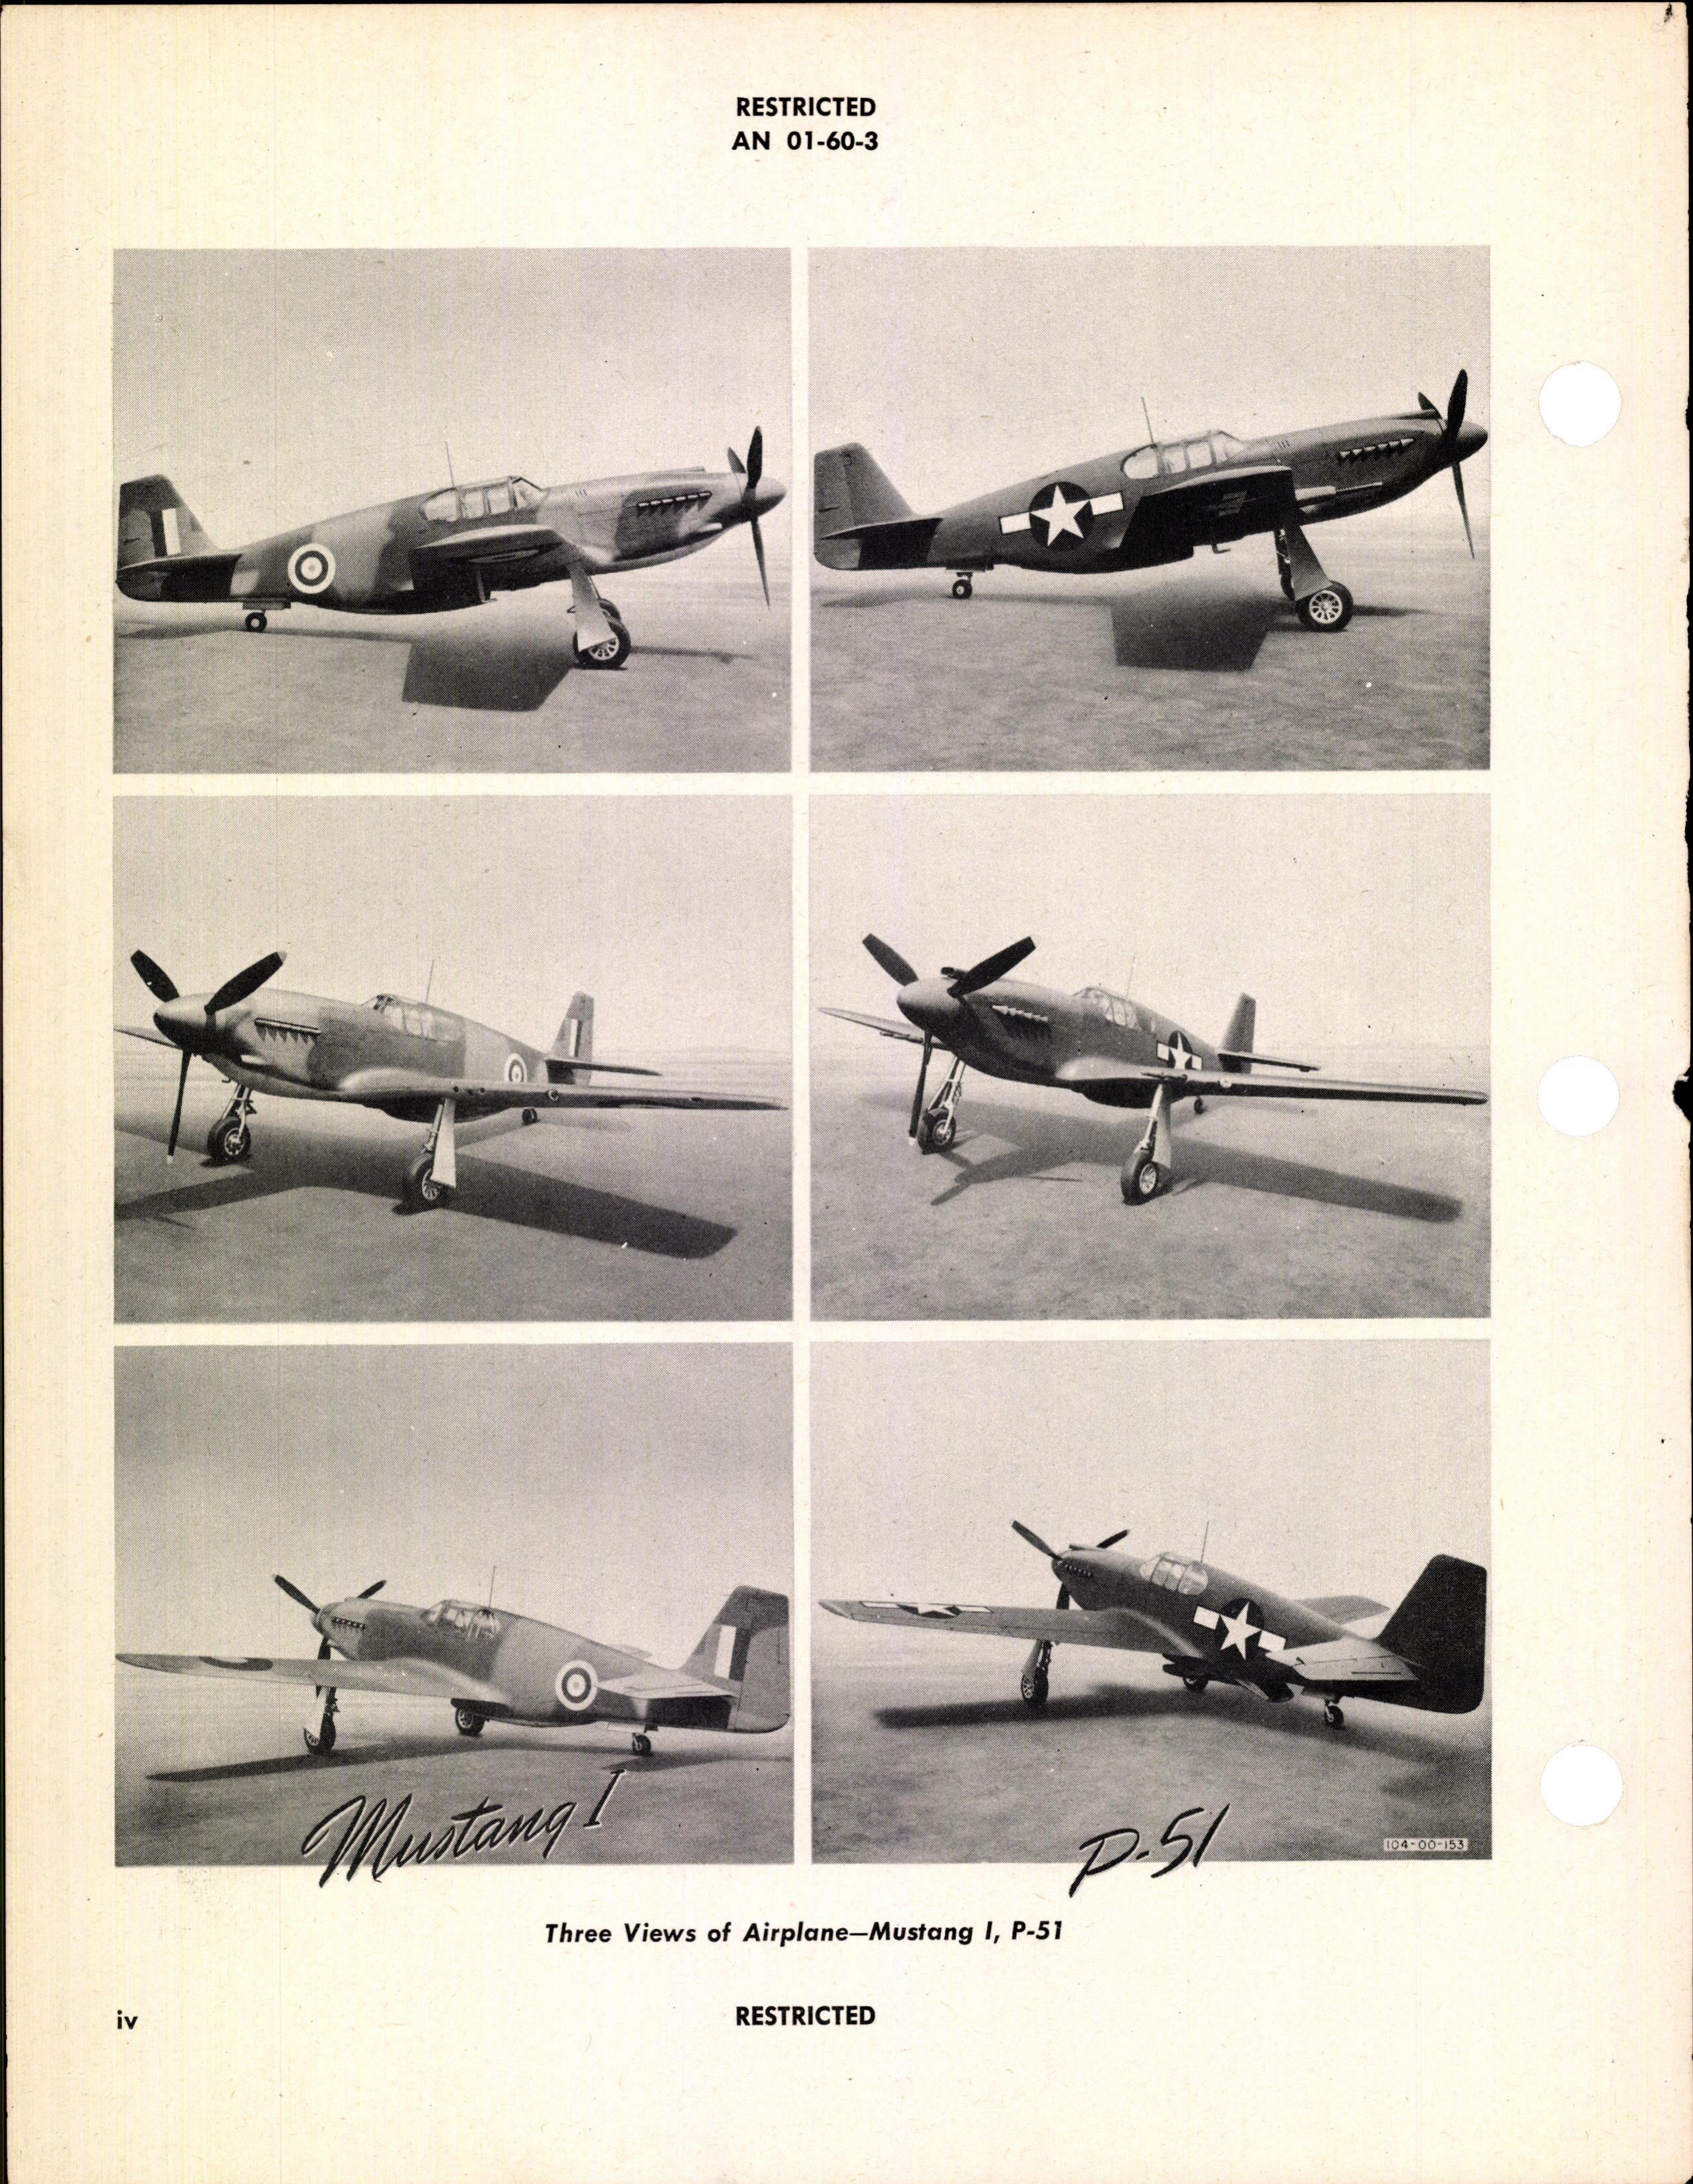 Sample page 6 from AirCorps Library document: Structural Repair Instructions for A-36 and P-51 Series